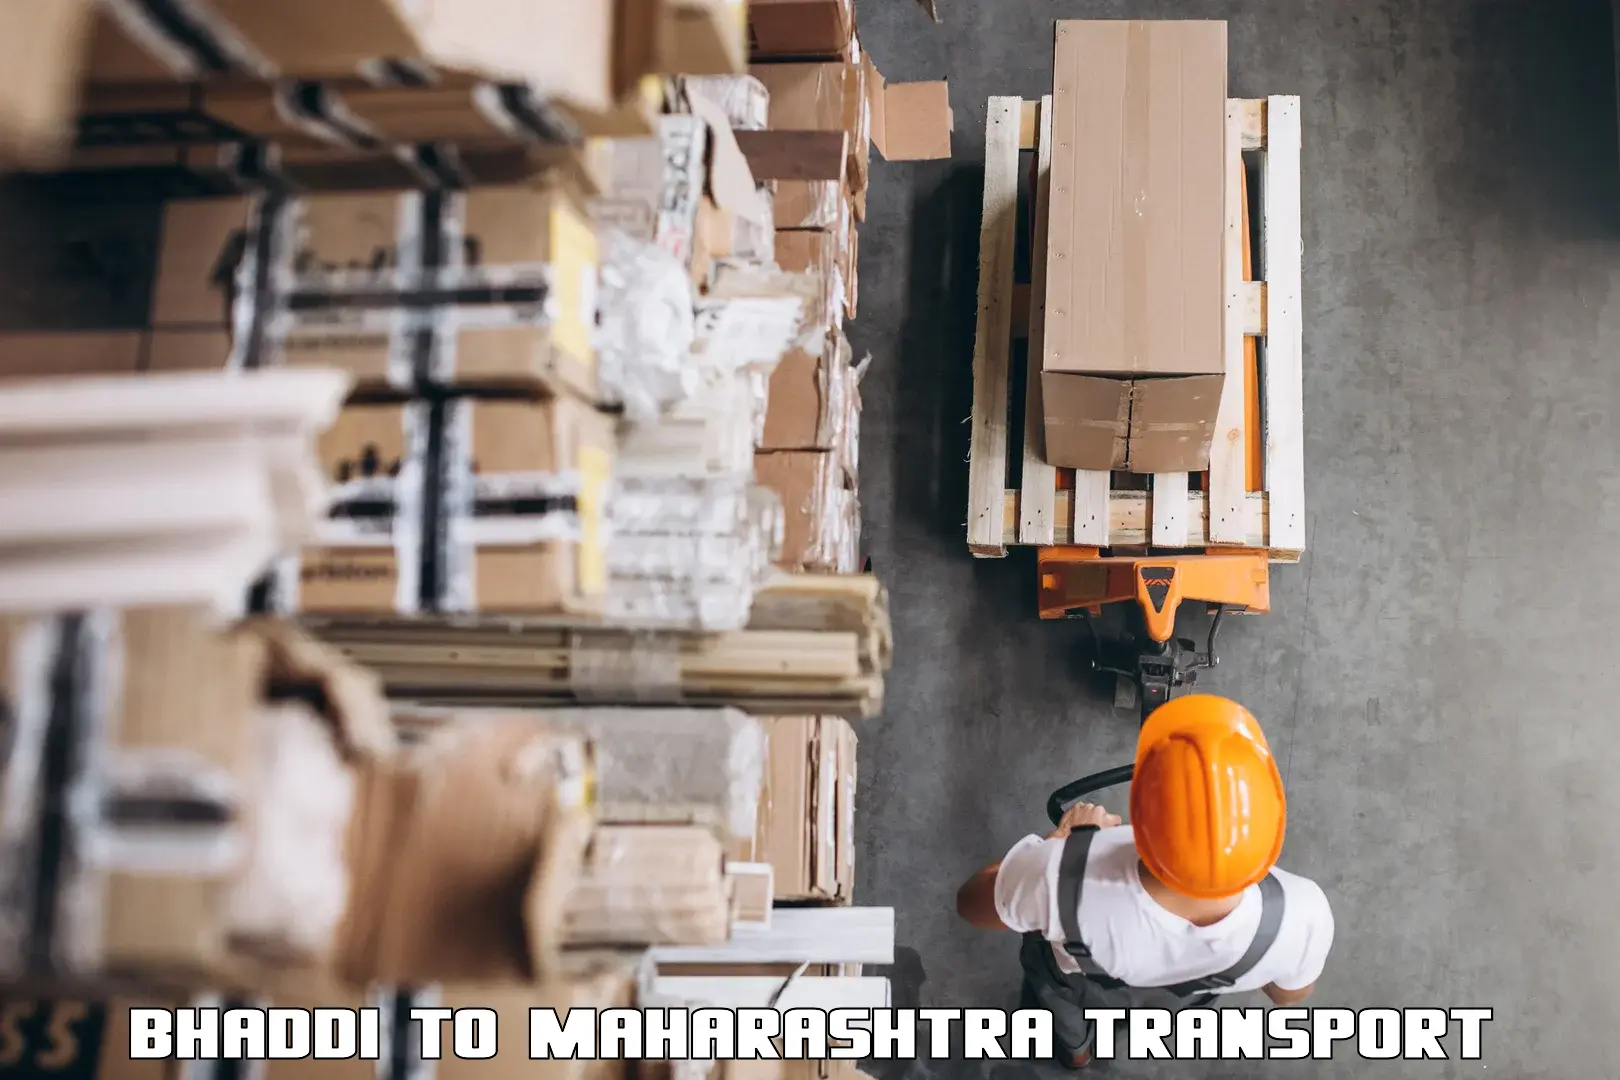 Container transportation services Bhaddi to Chandrapur